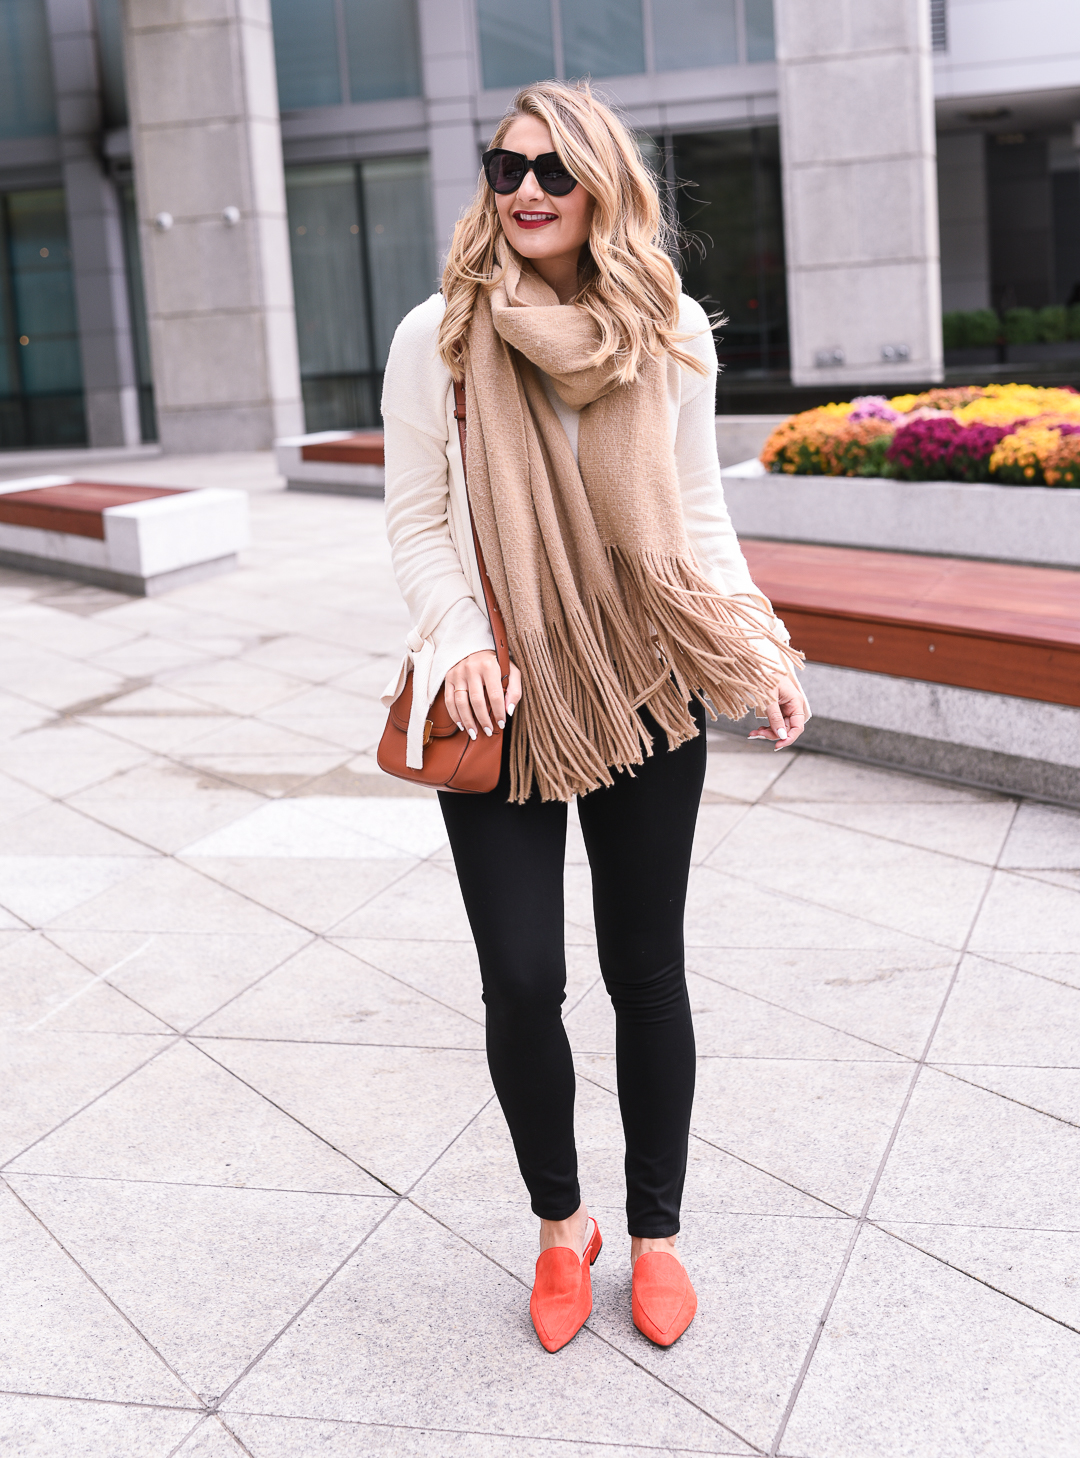 madewell tie sleeve sweater from nordstrom in ivory